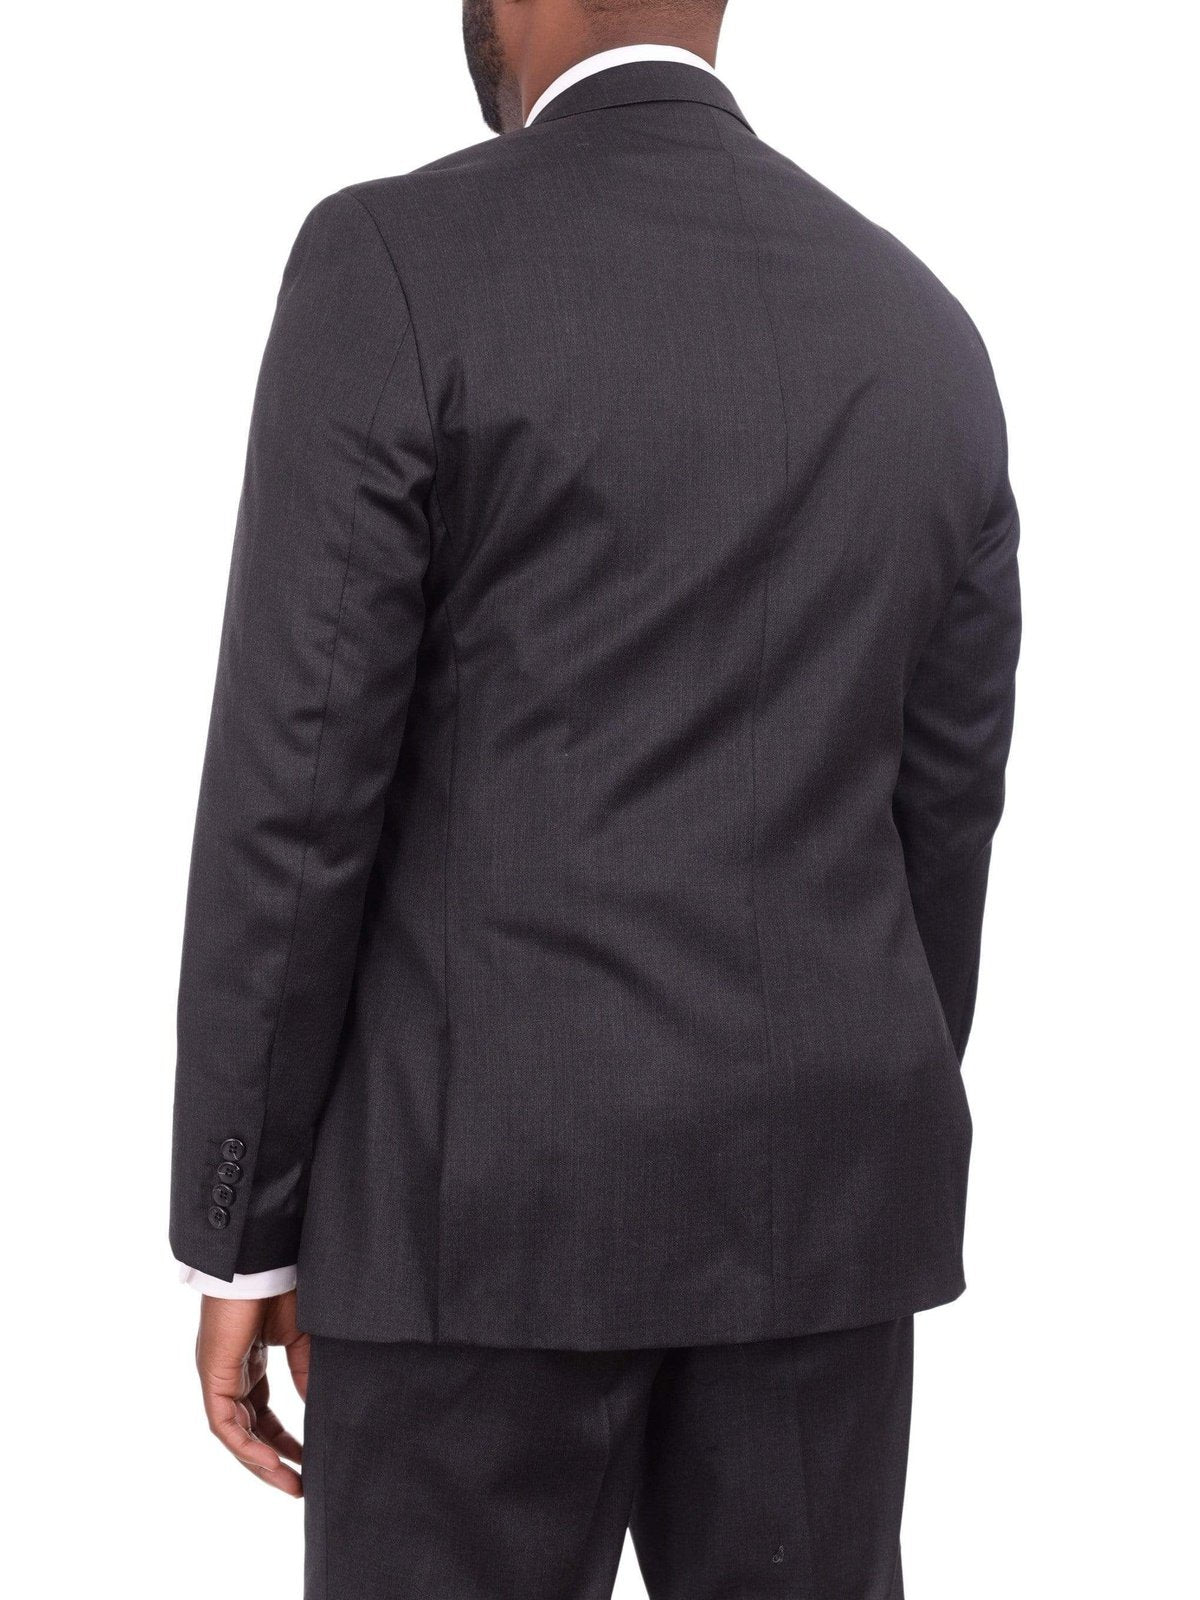 Giorgio Cosani TWO PIECE SUITS Giorgio Cosani Regular Fit Solid Charcoal Gray Two Button Wool Suit